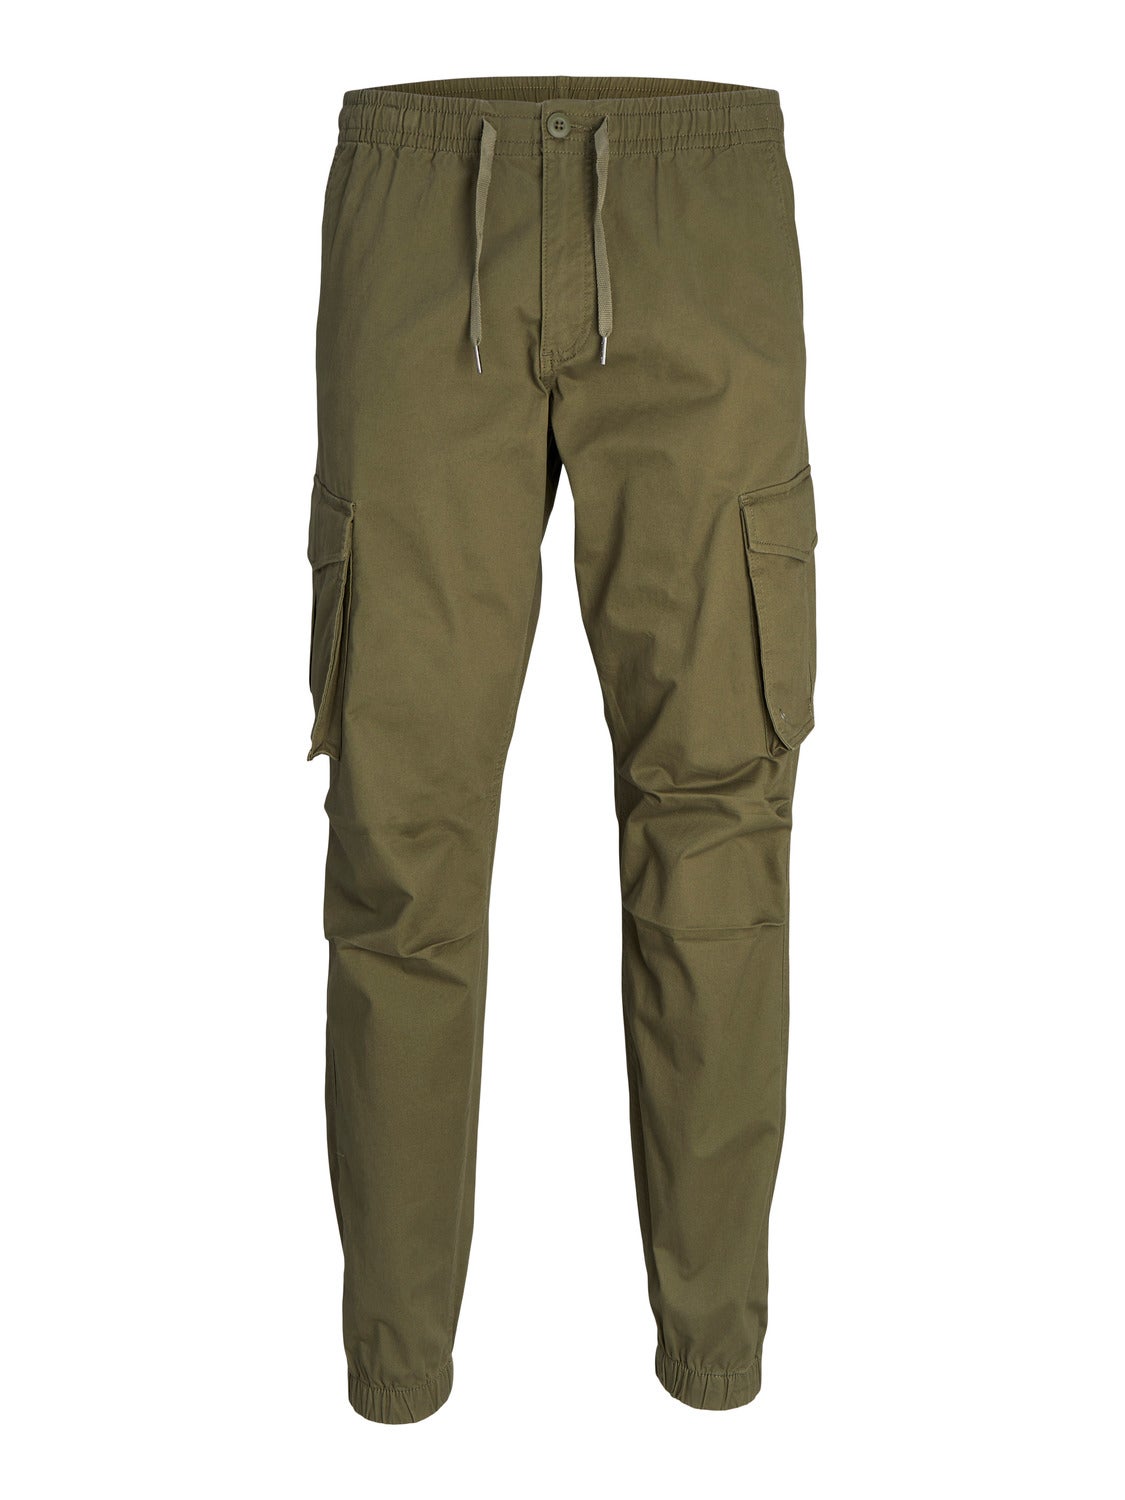 Surplus Infantry Trousers Mens Combats Military Style Cargo Pants Olive OD  S-XXL | eBay